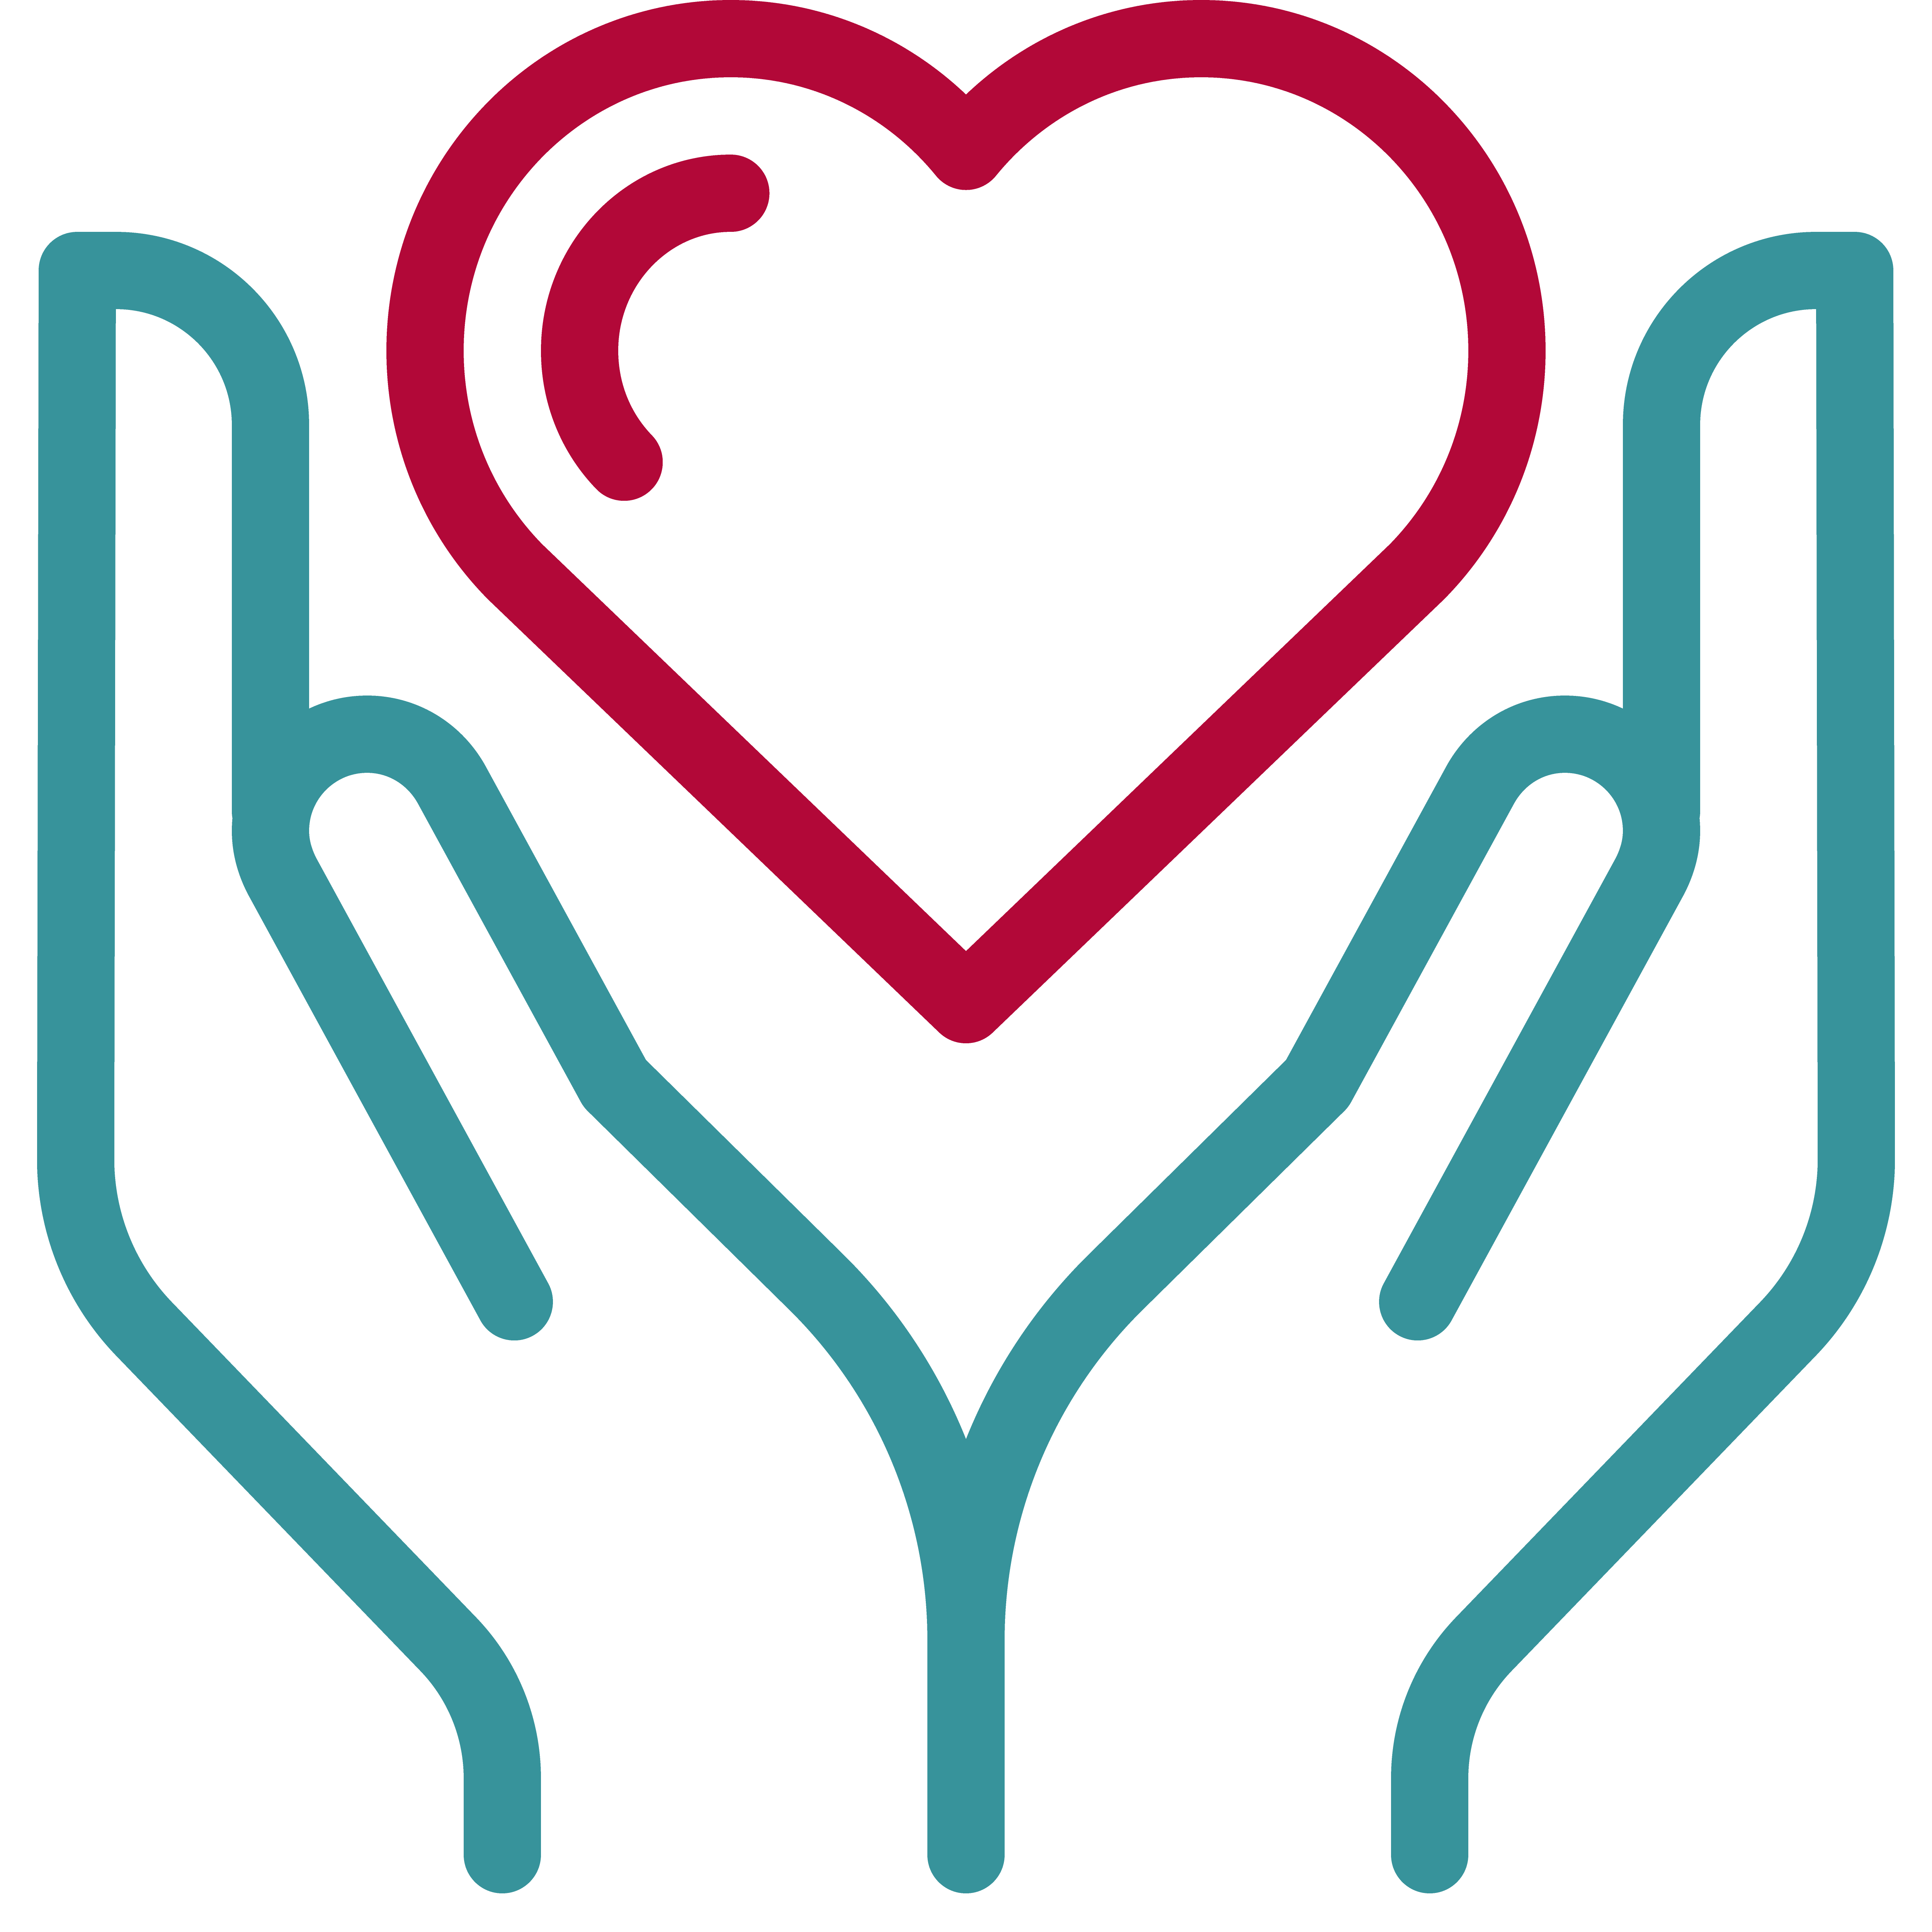 Heart in hands icon